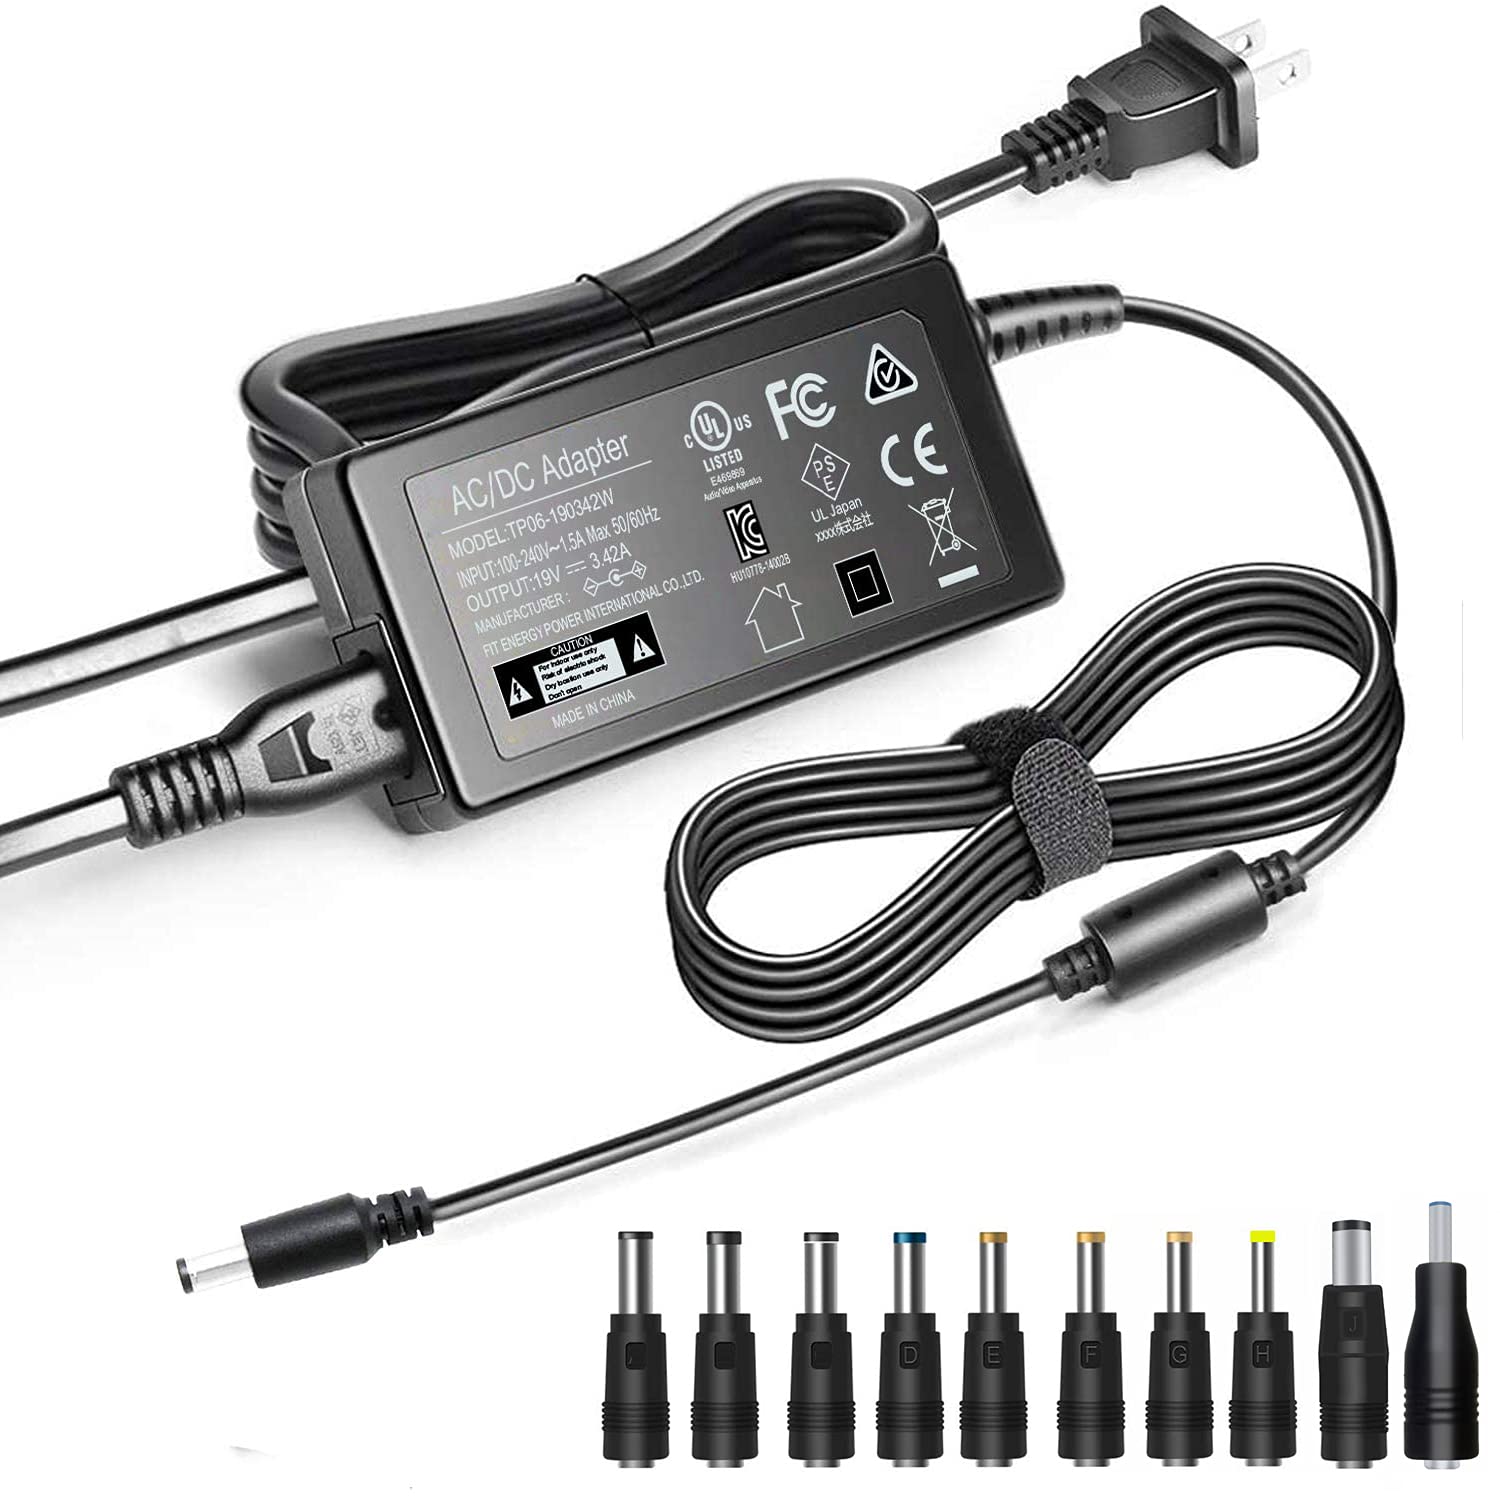 Mua UL Listed 19V  Laptop Charger, F1TP 65W Power Supply AC/DC Adapter  for HP Acer Samsung Toshiba Fujitsu Lenovo Asus Gateway IBM Sony LG TV  Monitors and Notebooks Chromebook trên Amazon